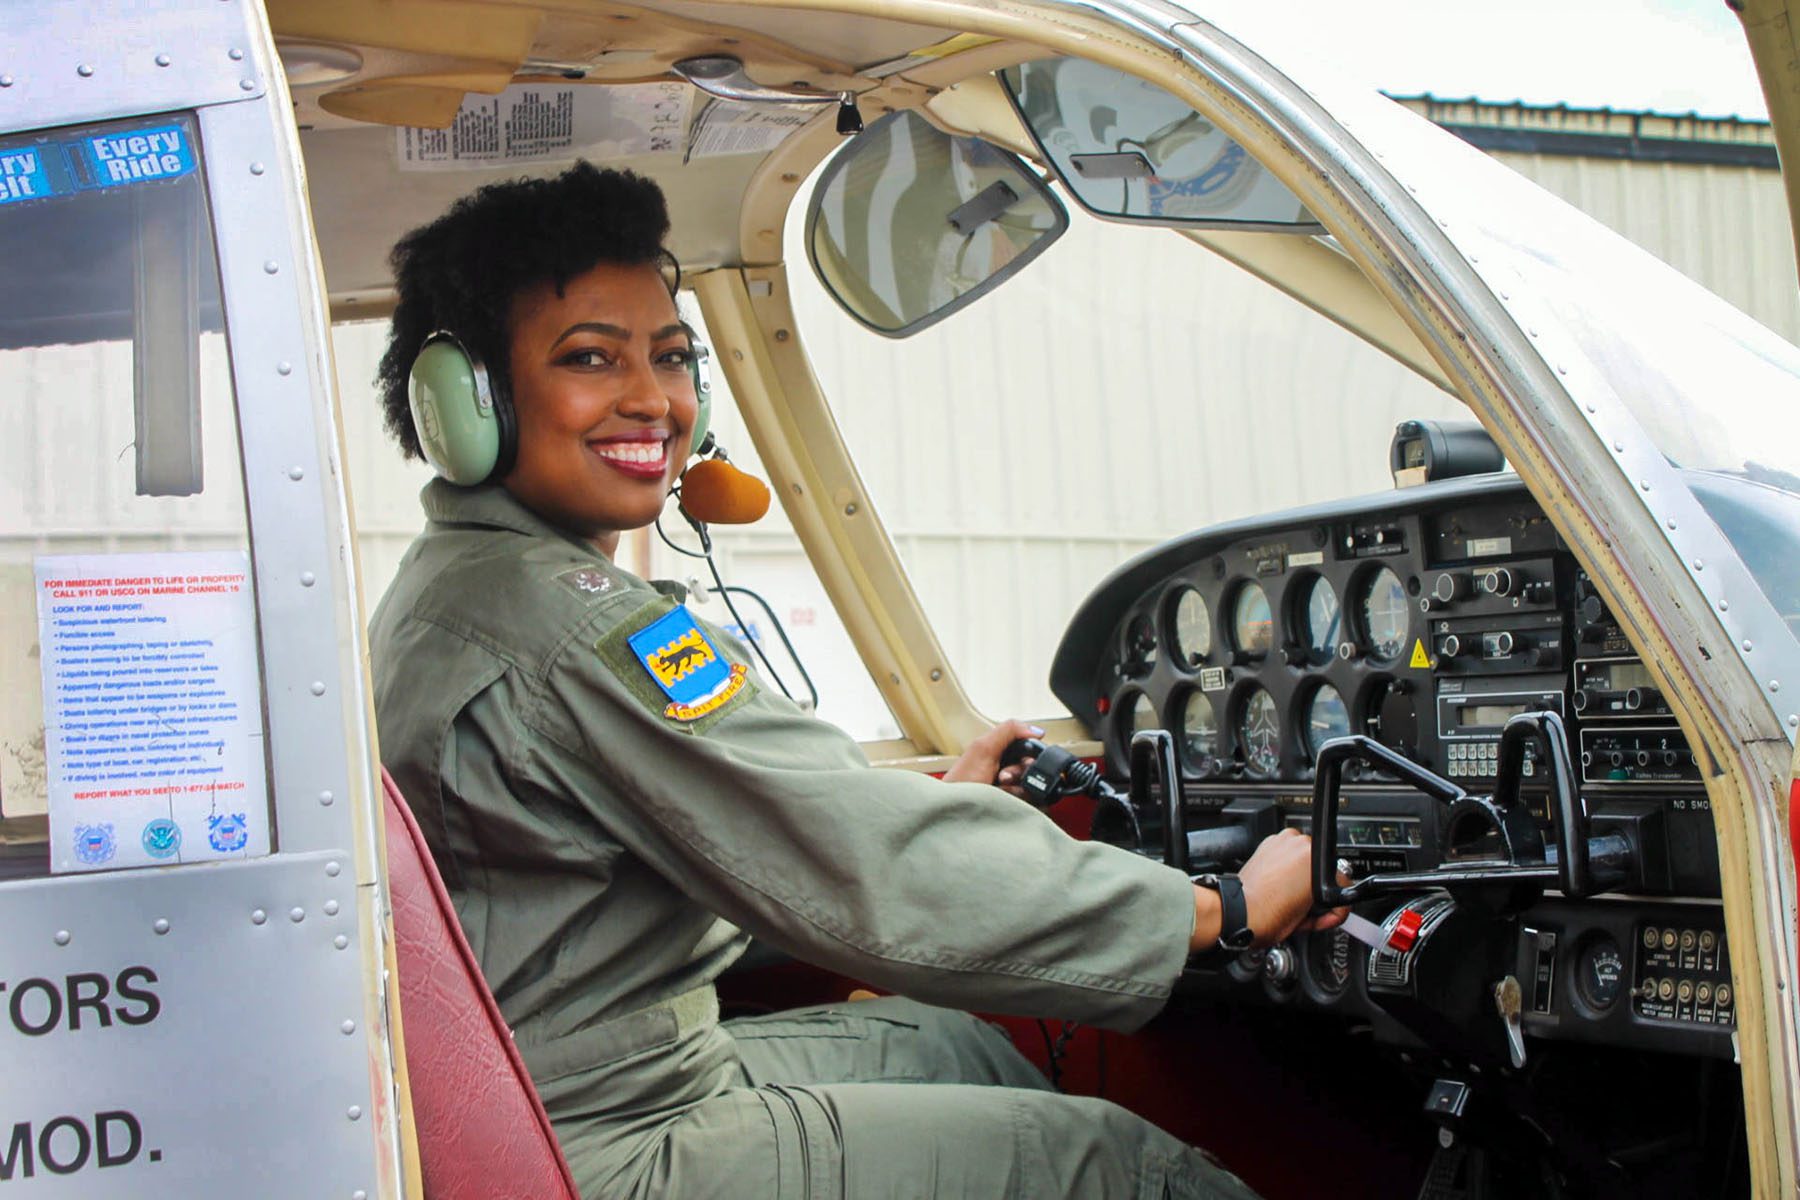 Jennifer-Ruth Green smiles while posing inside of an airplane.